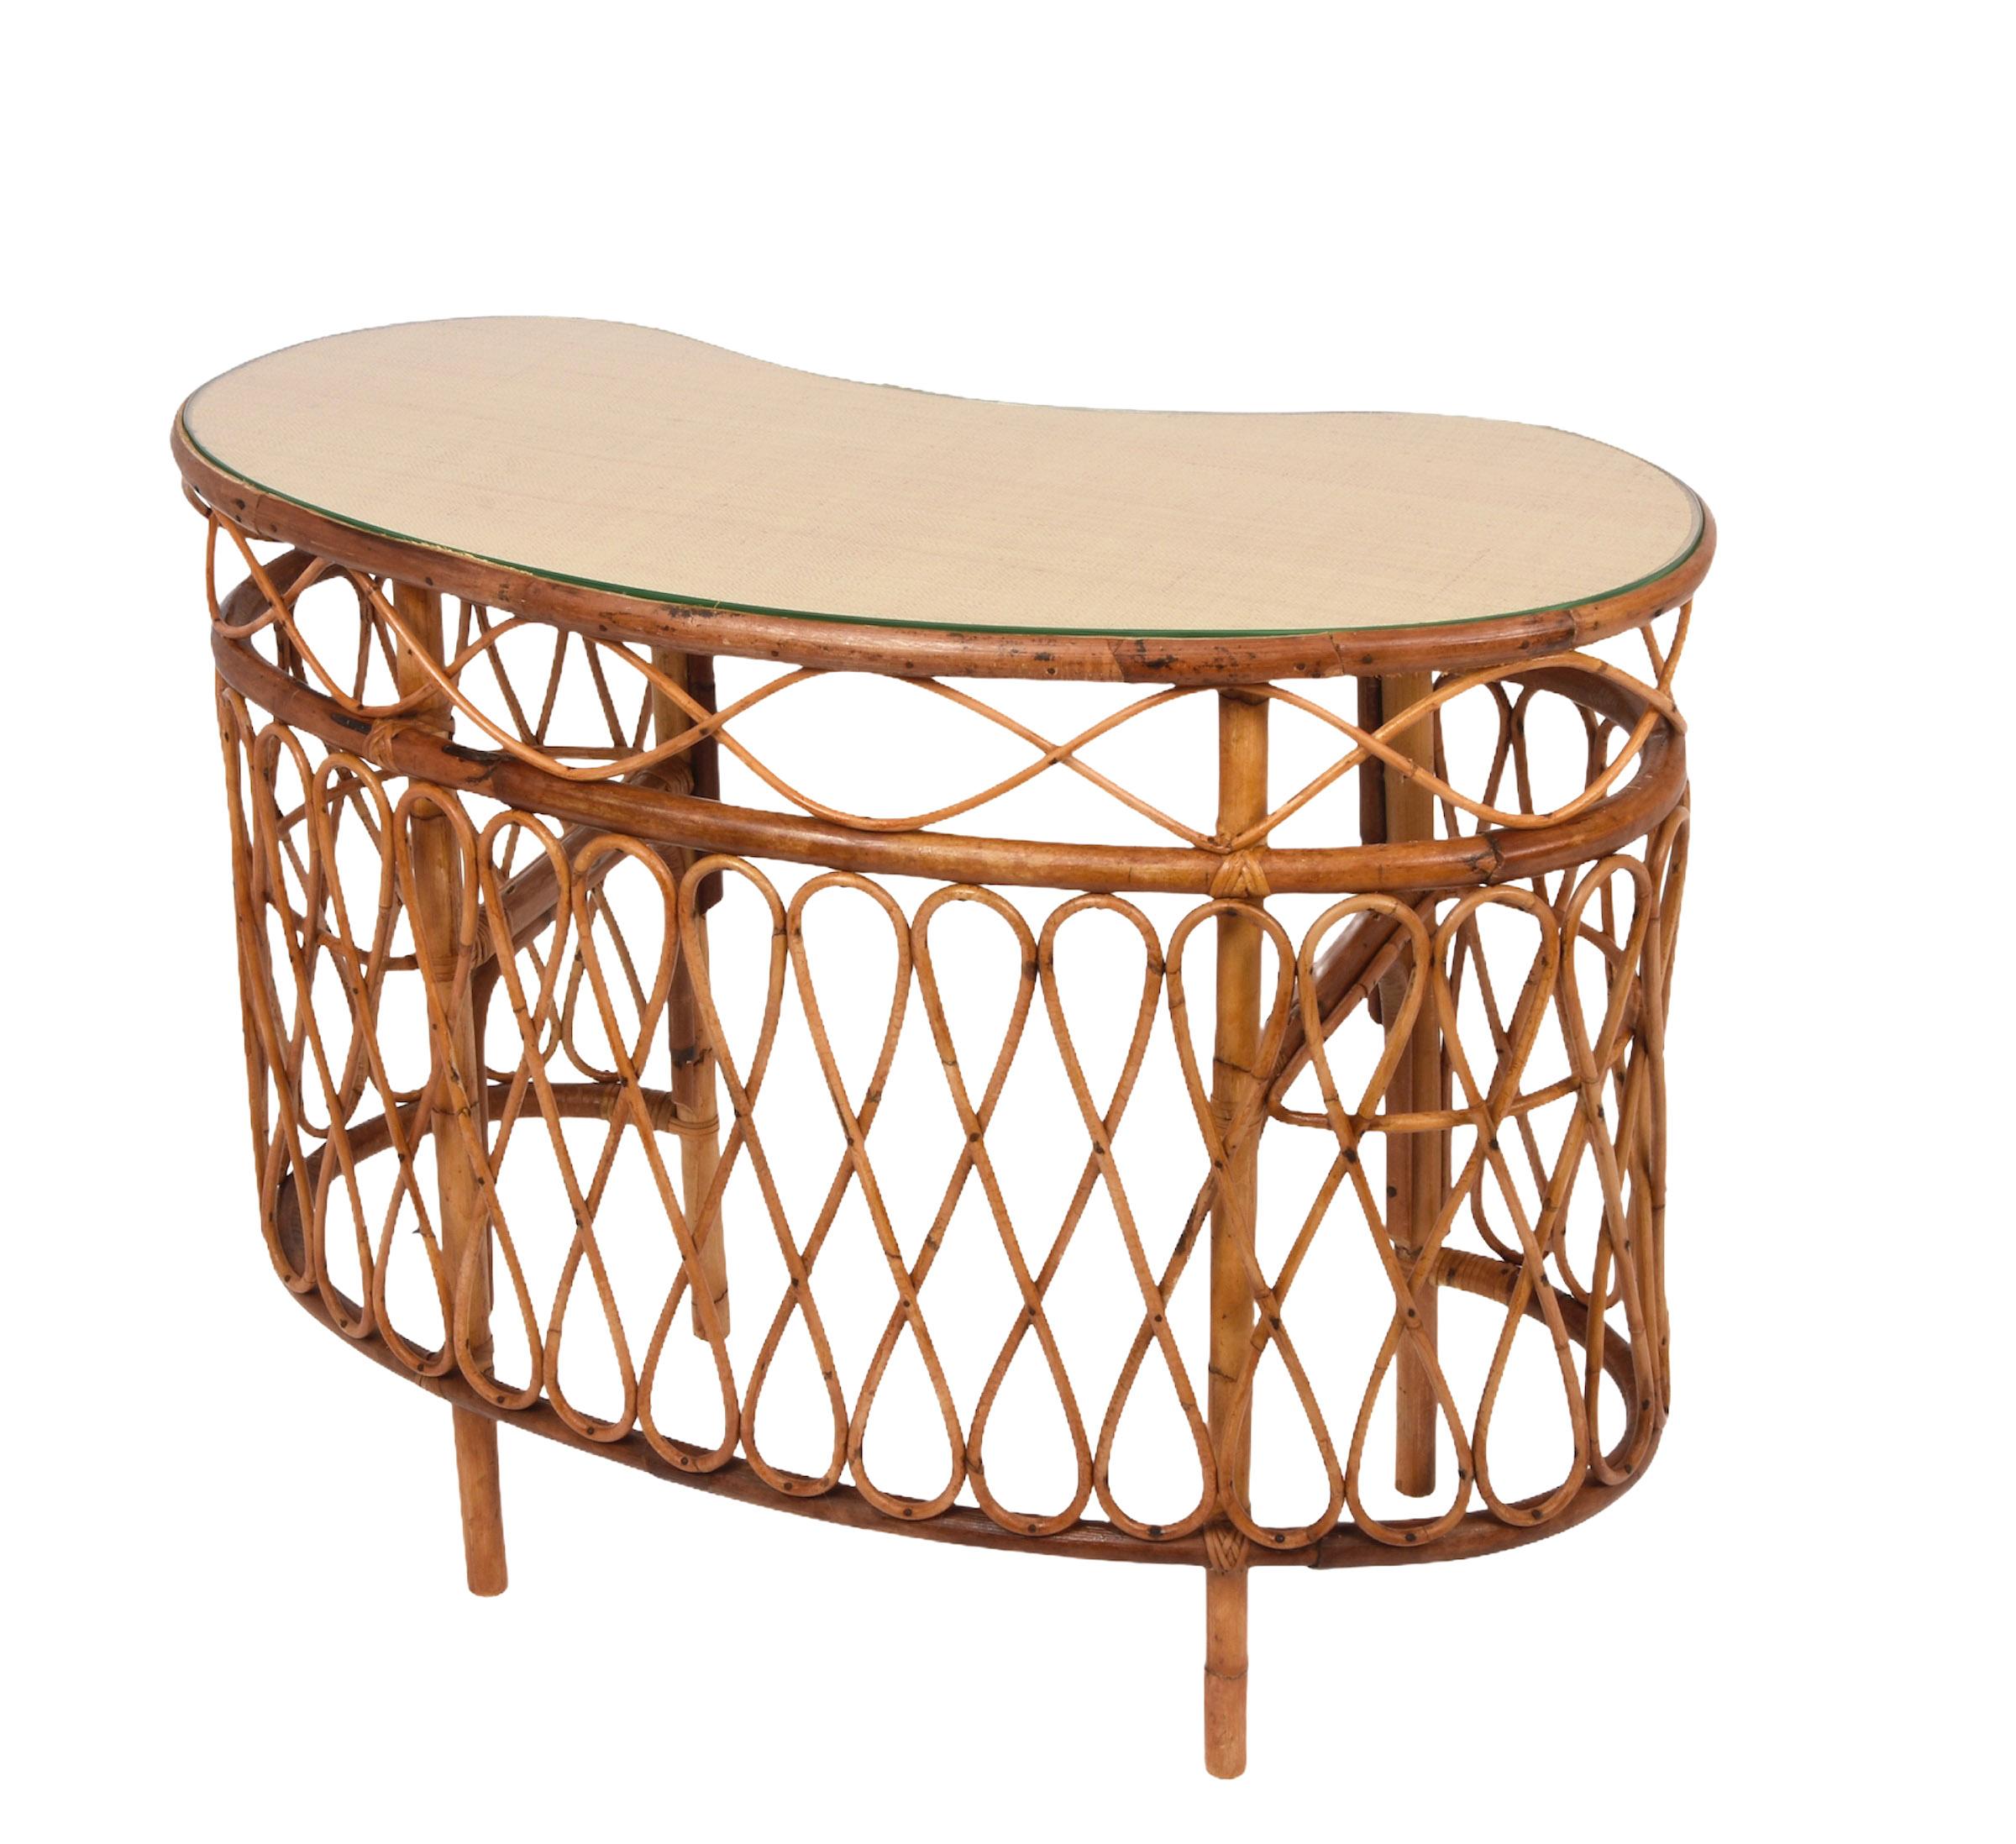 Italian Midcentury Bamboo Wicker and Glass Cocktail Console Table after Albini, 1970s